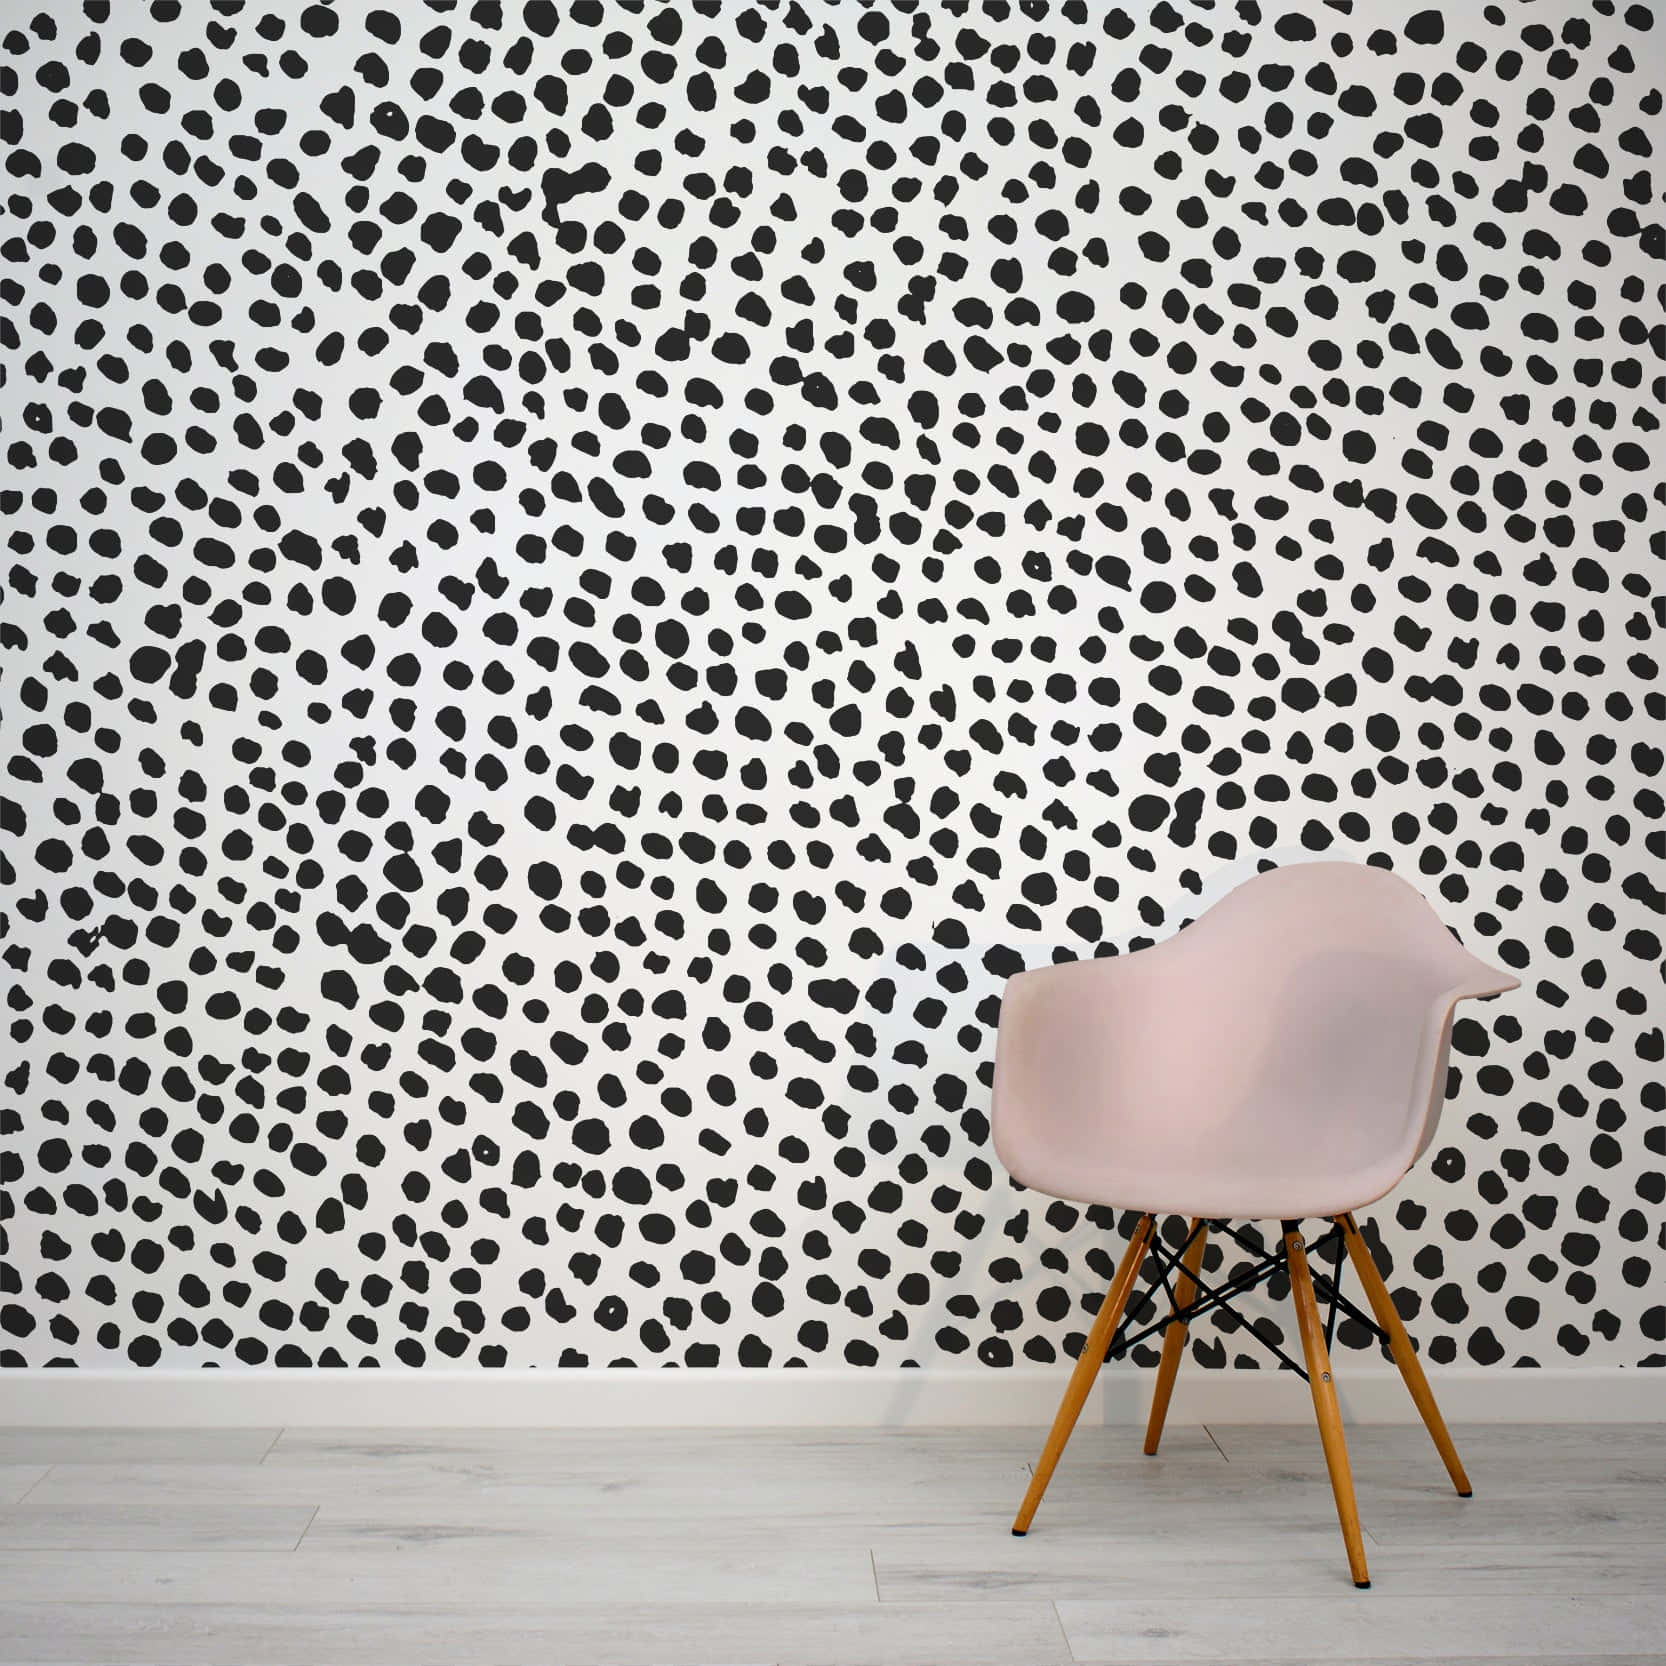 Study the Contrast of Color in this Abstract Shapes Wallpaper